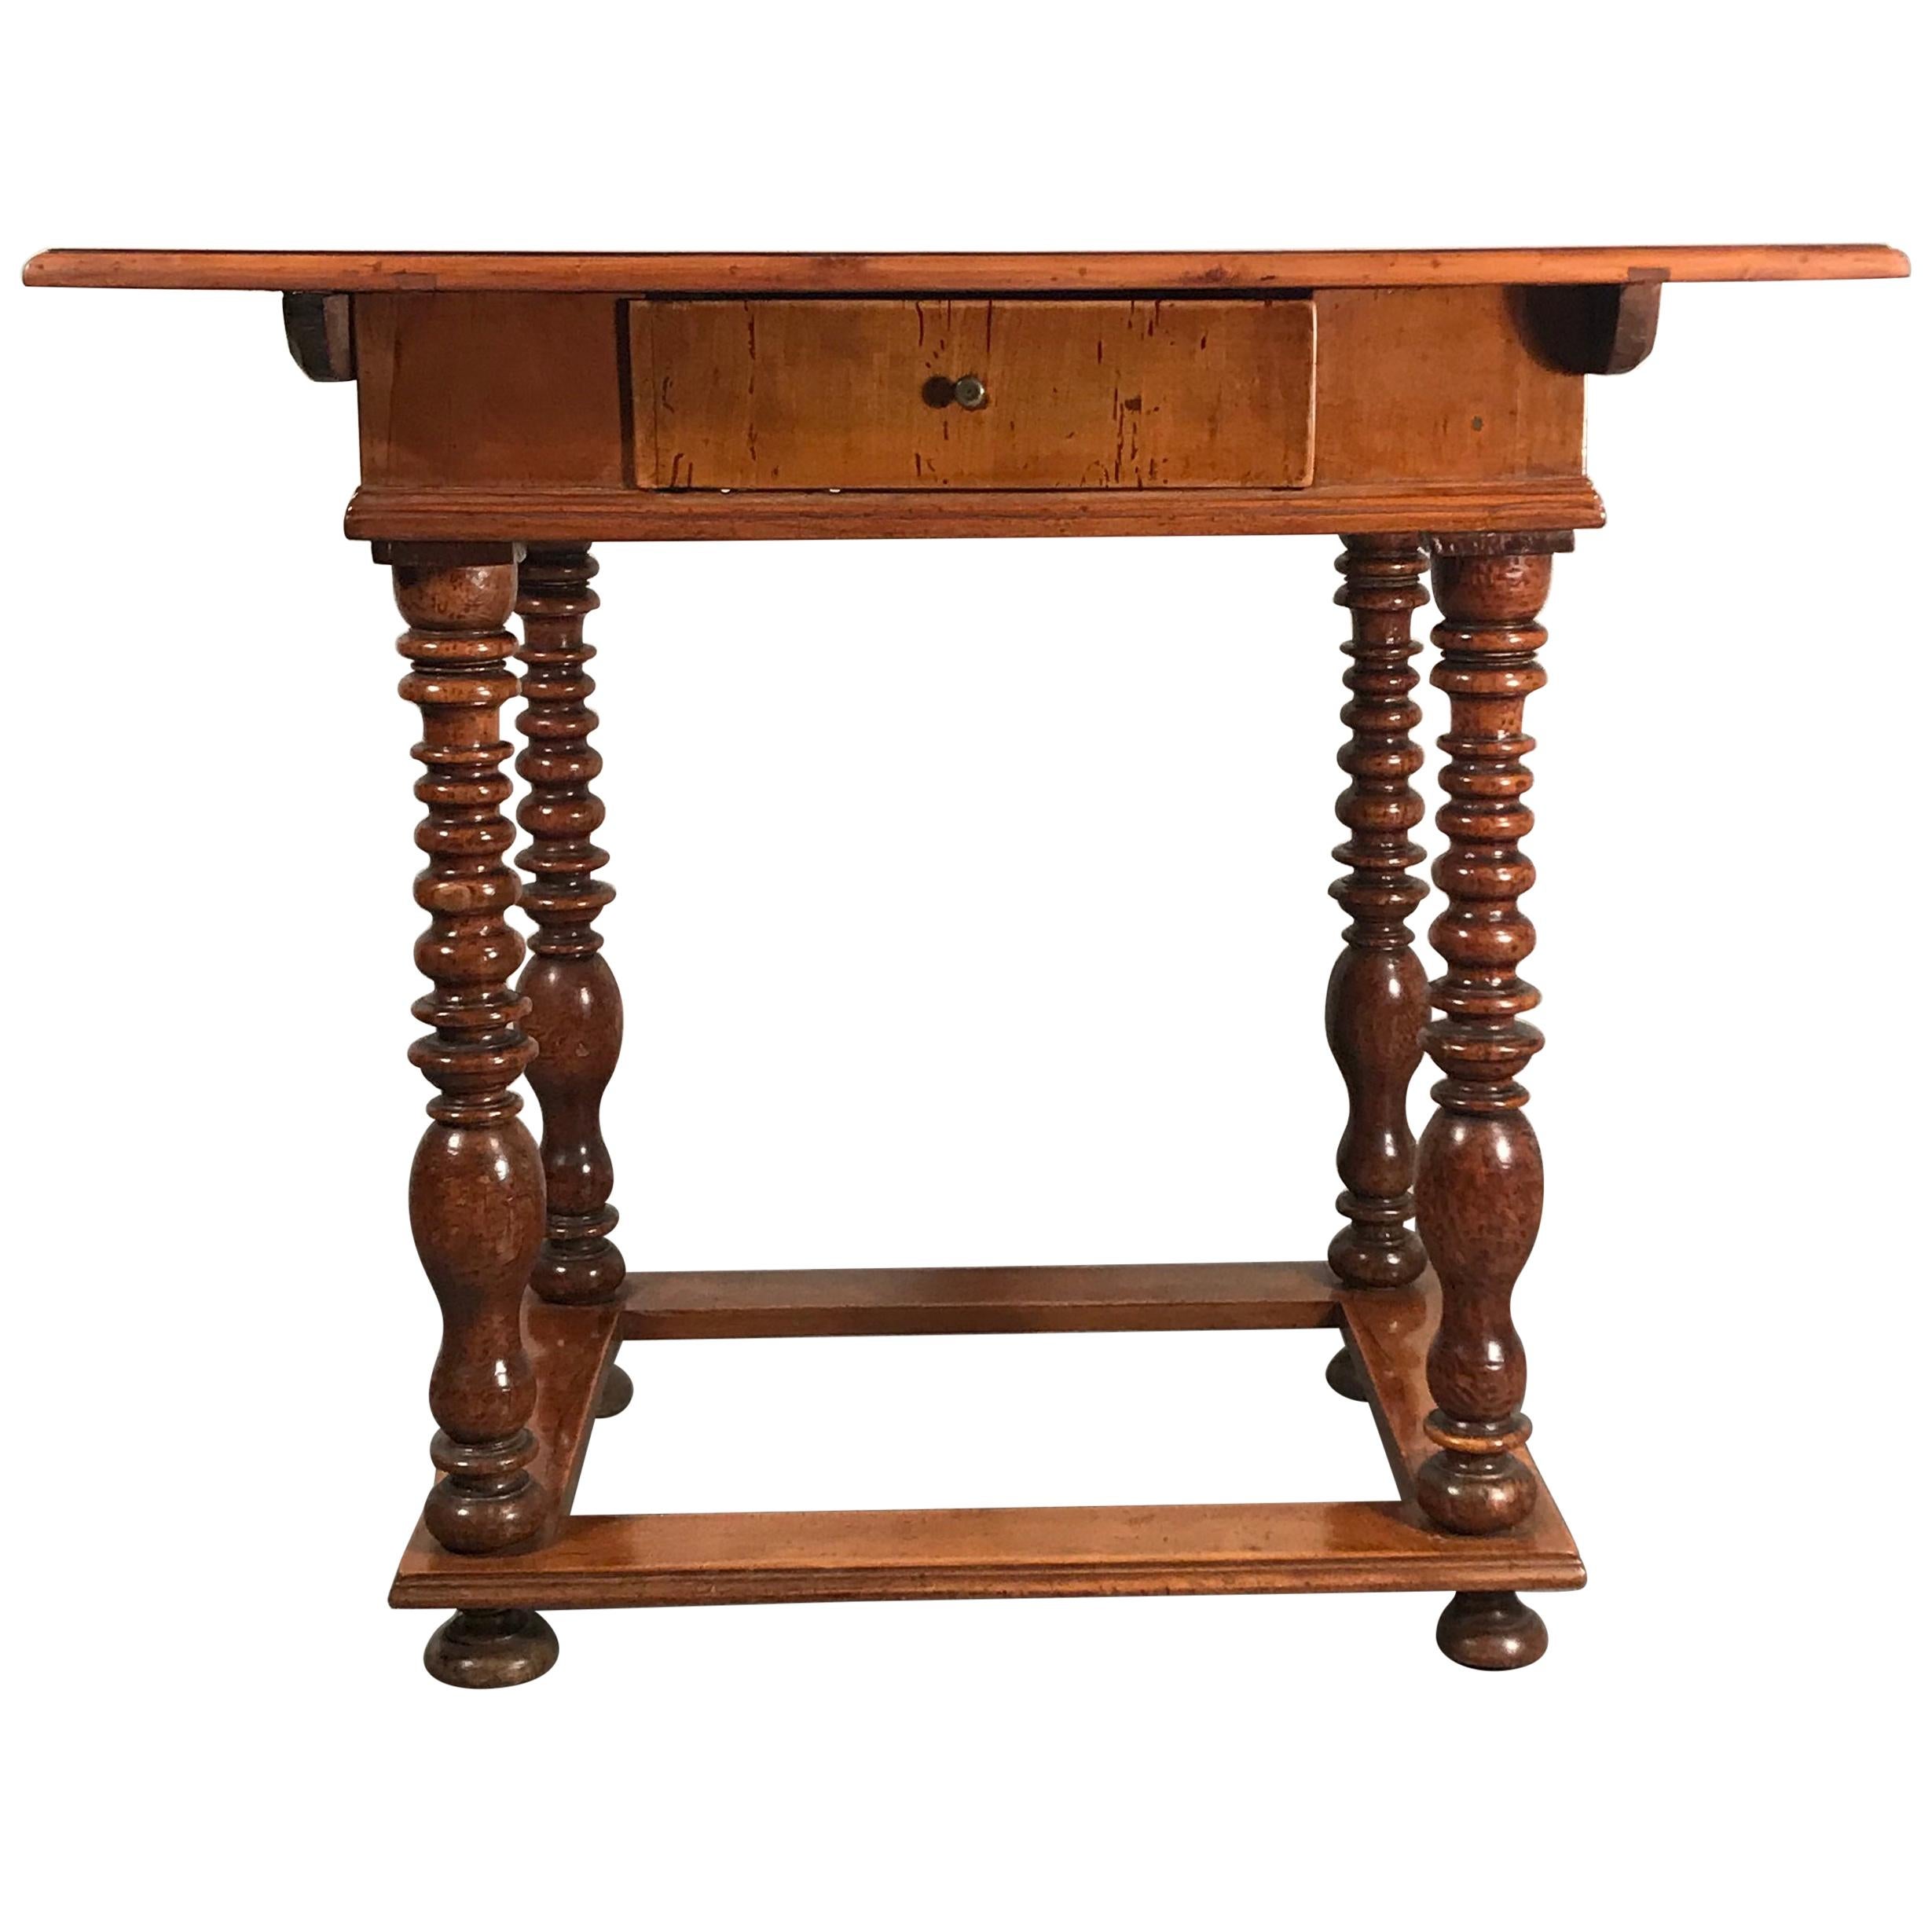 Baroque Table, Southern Germany, Augsburg Region 1750, Walnut For Sale